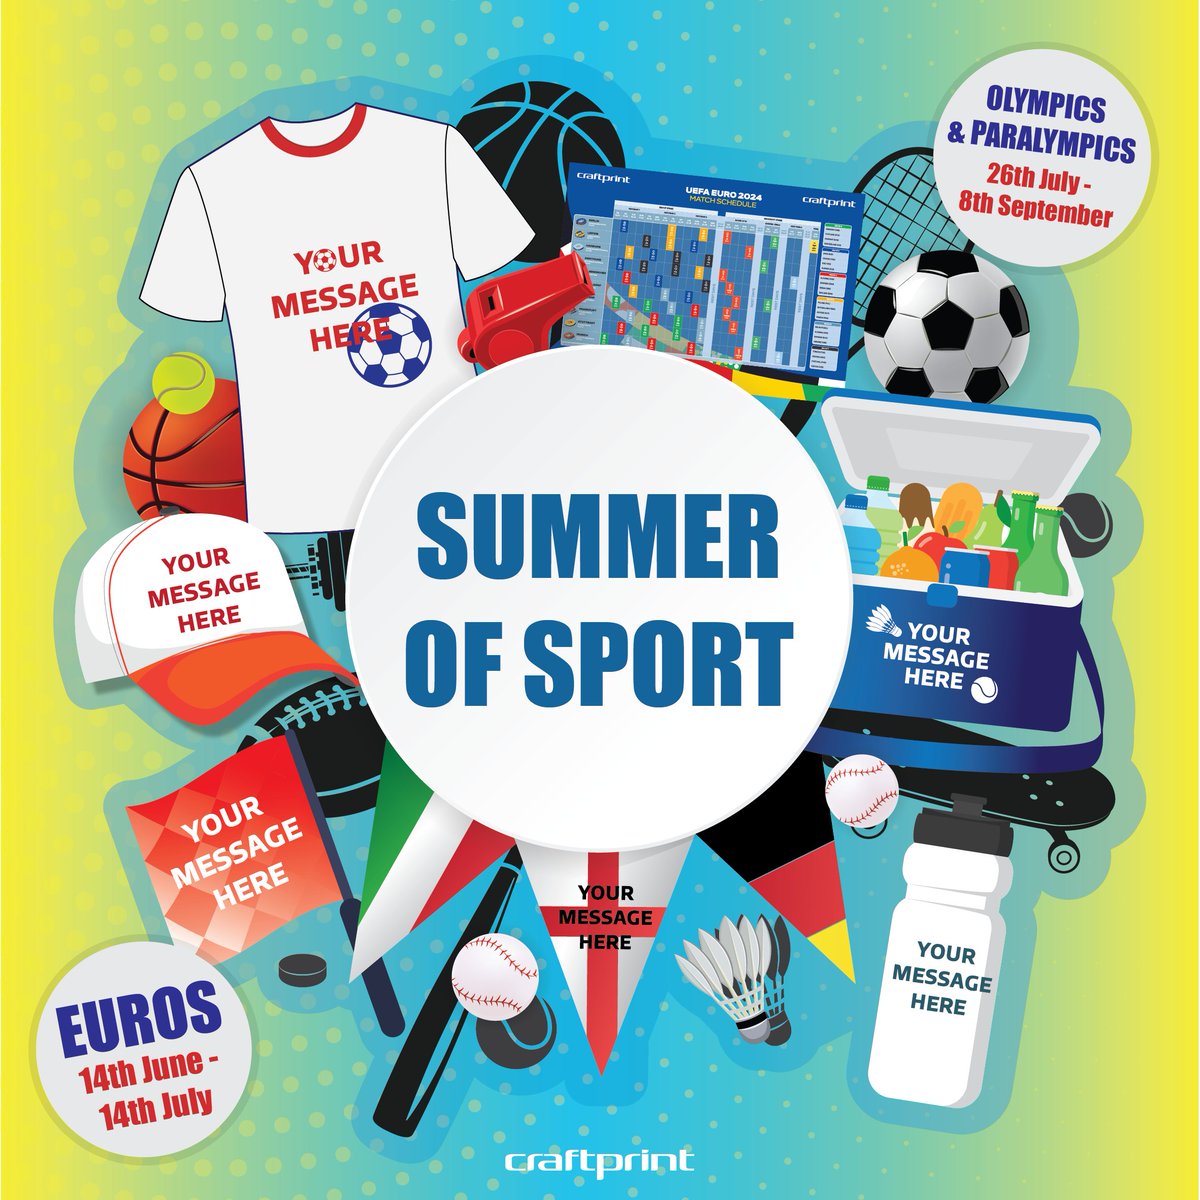 We're supporting the nation this summer, get in touch if your business wants to do the same!

Contact us at 01204 694993 or email us at online@craftprint.co.uk to get involved.

#SupportTheNation #SummerofSport #GetInvolved #TeamSpirit #Craftprint #PrintingSolutions